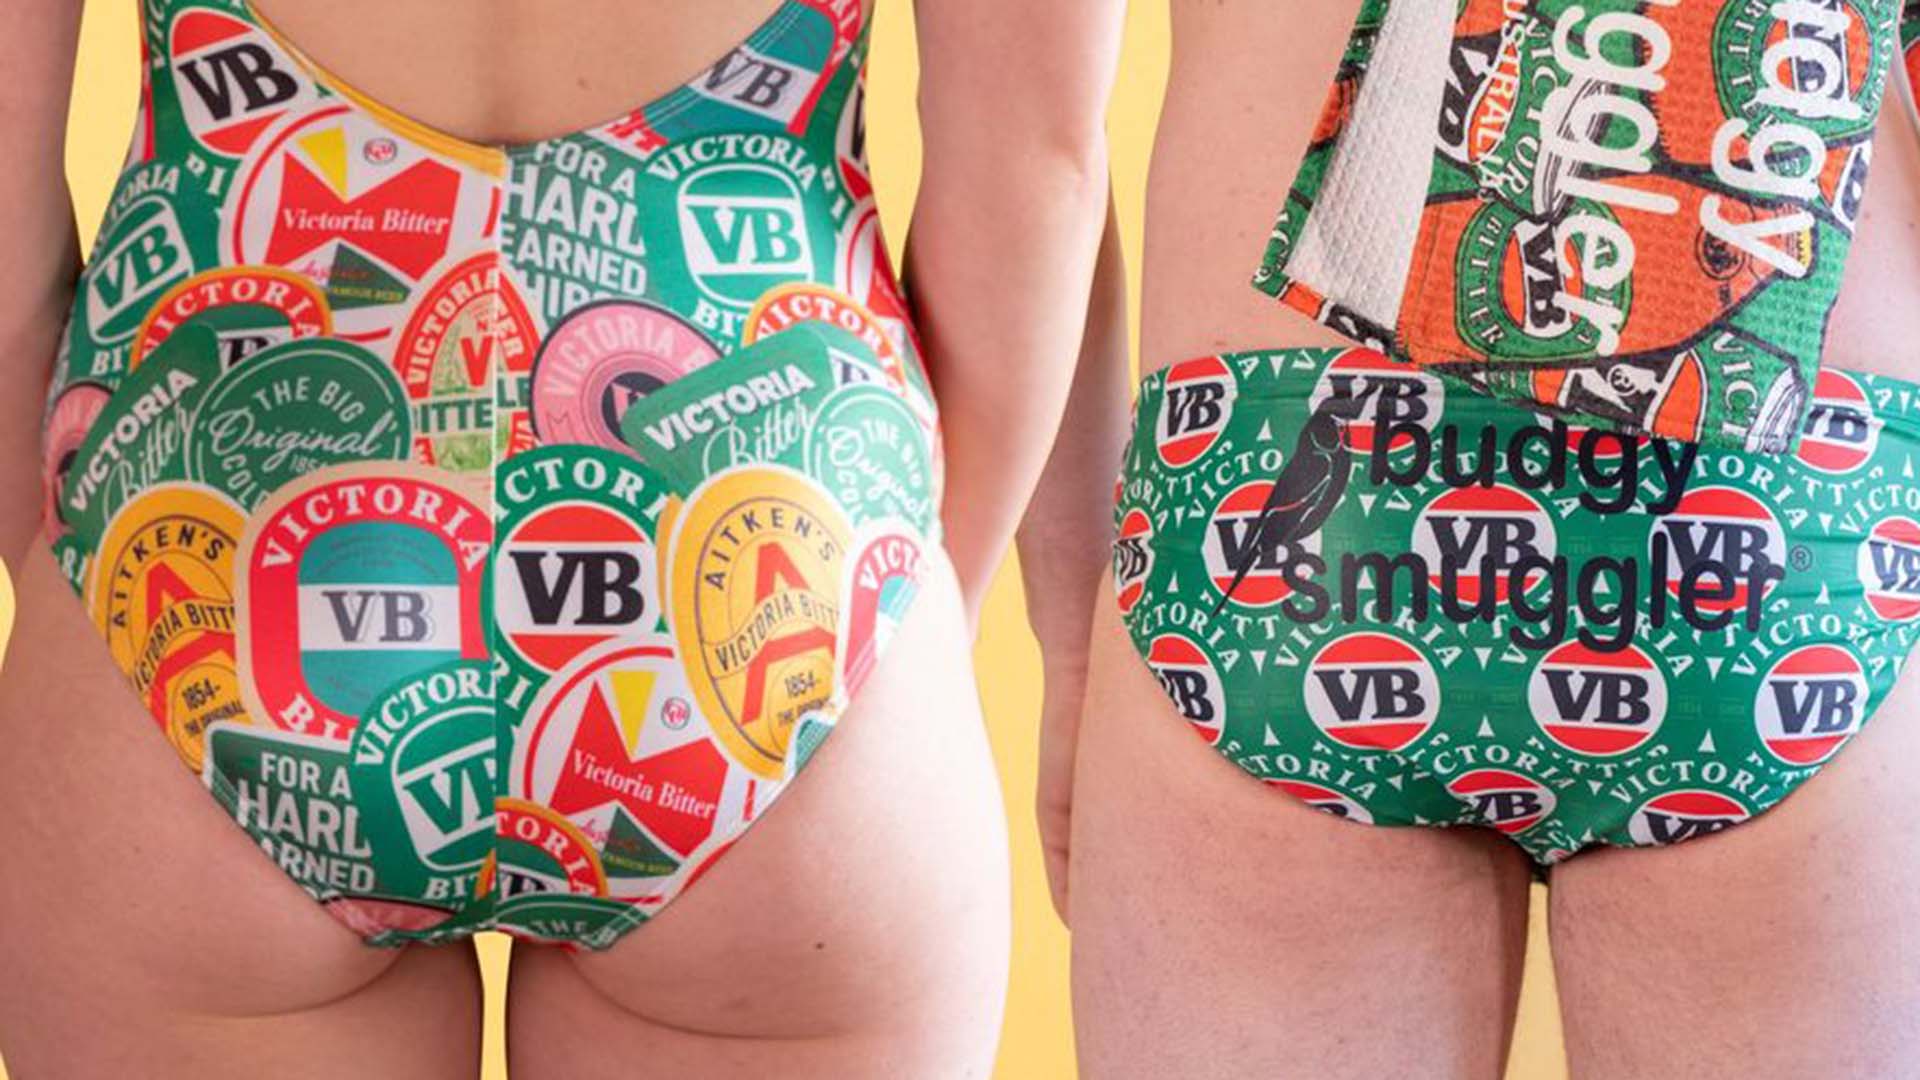 Victoria Bitter and Budgy Smuggler Have Released a Range of Retro VB-Themed Swimwear